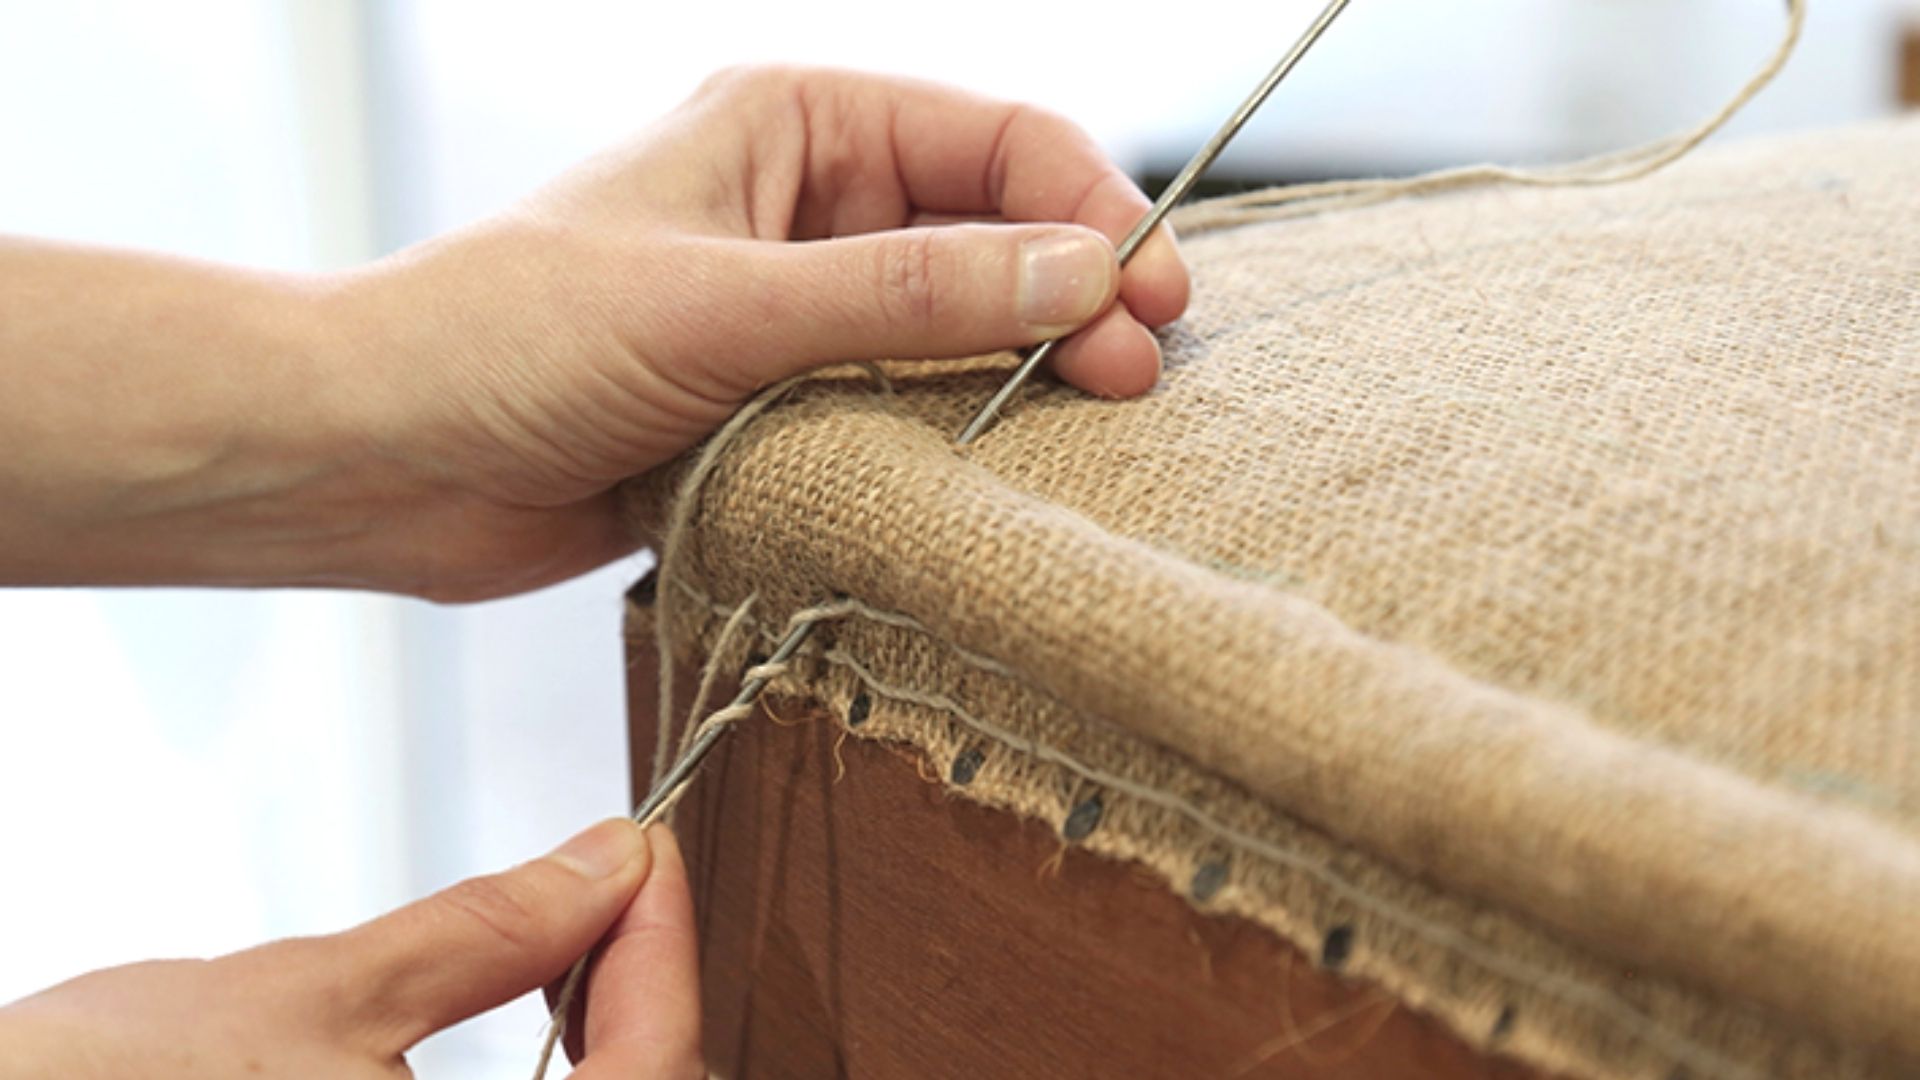 Accurate Guide for Upholstery Stitch Types